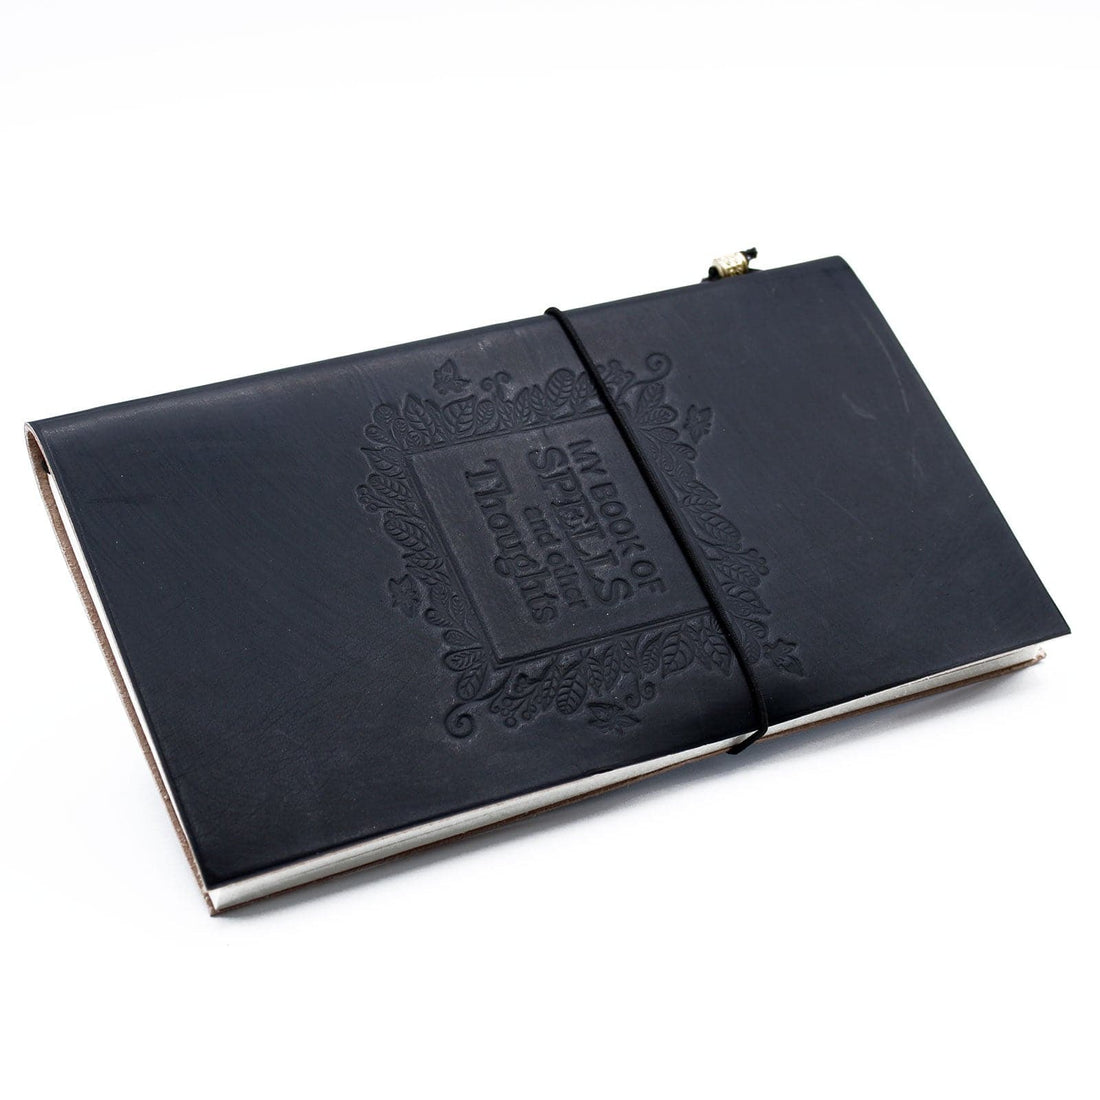 Handmade Leather Journal - My Book of Spells and other Thoughts - Black - best price from Maltashopper.com MSJ-13